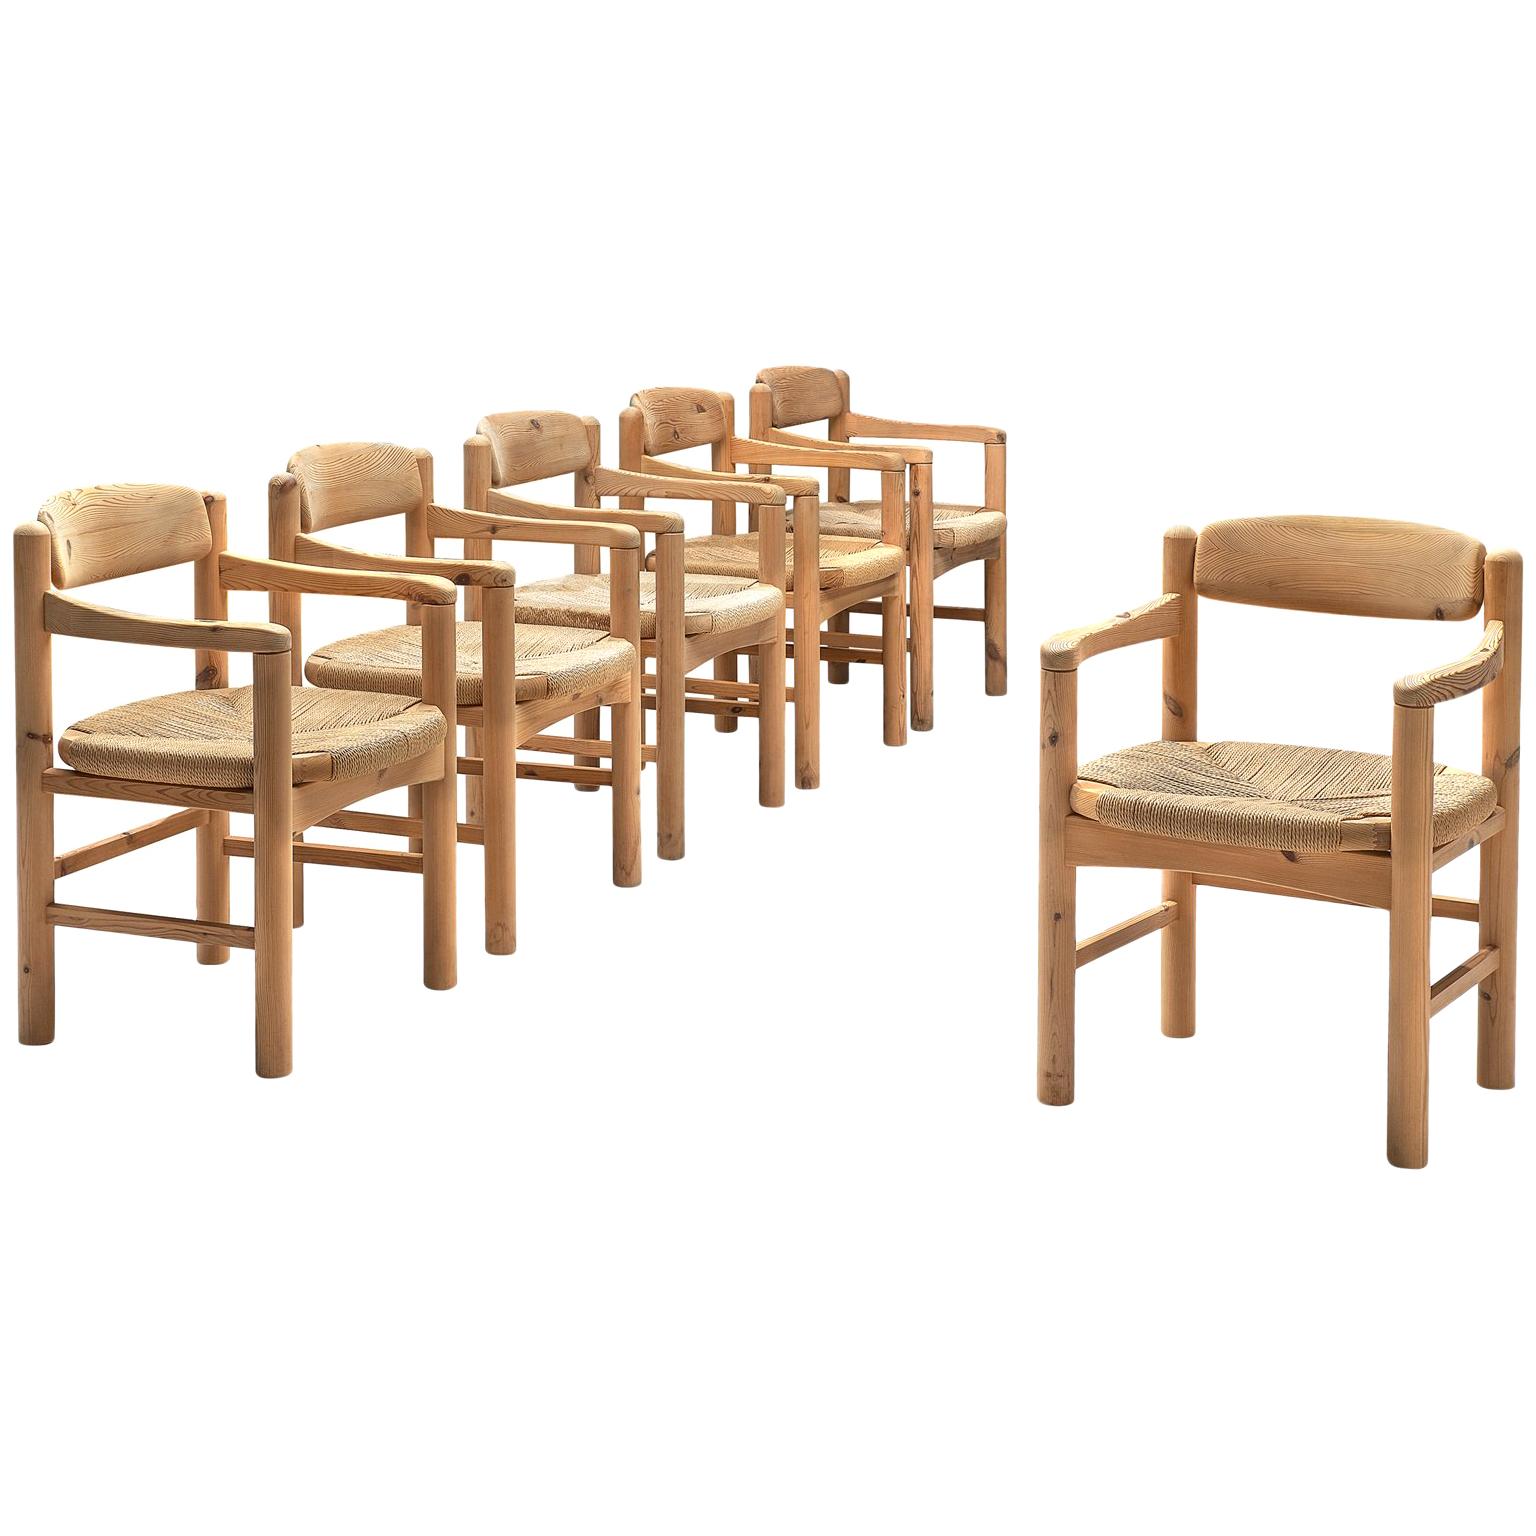 Rainer Daumiller Set of Six Armchairs in Solid Pine and Cane